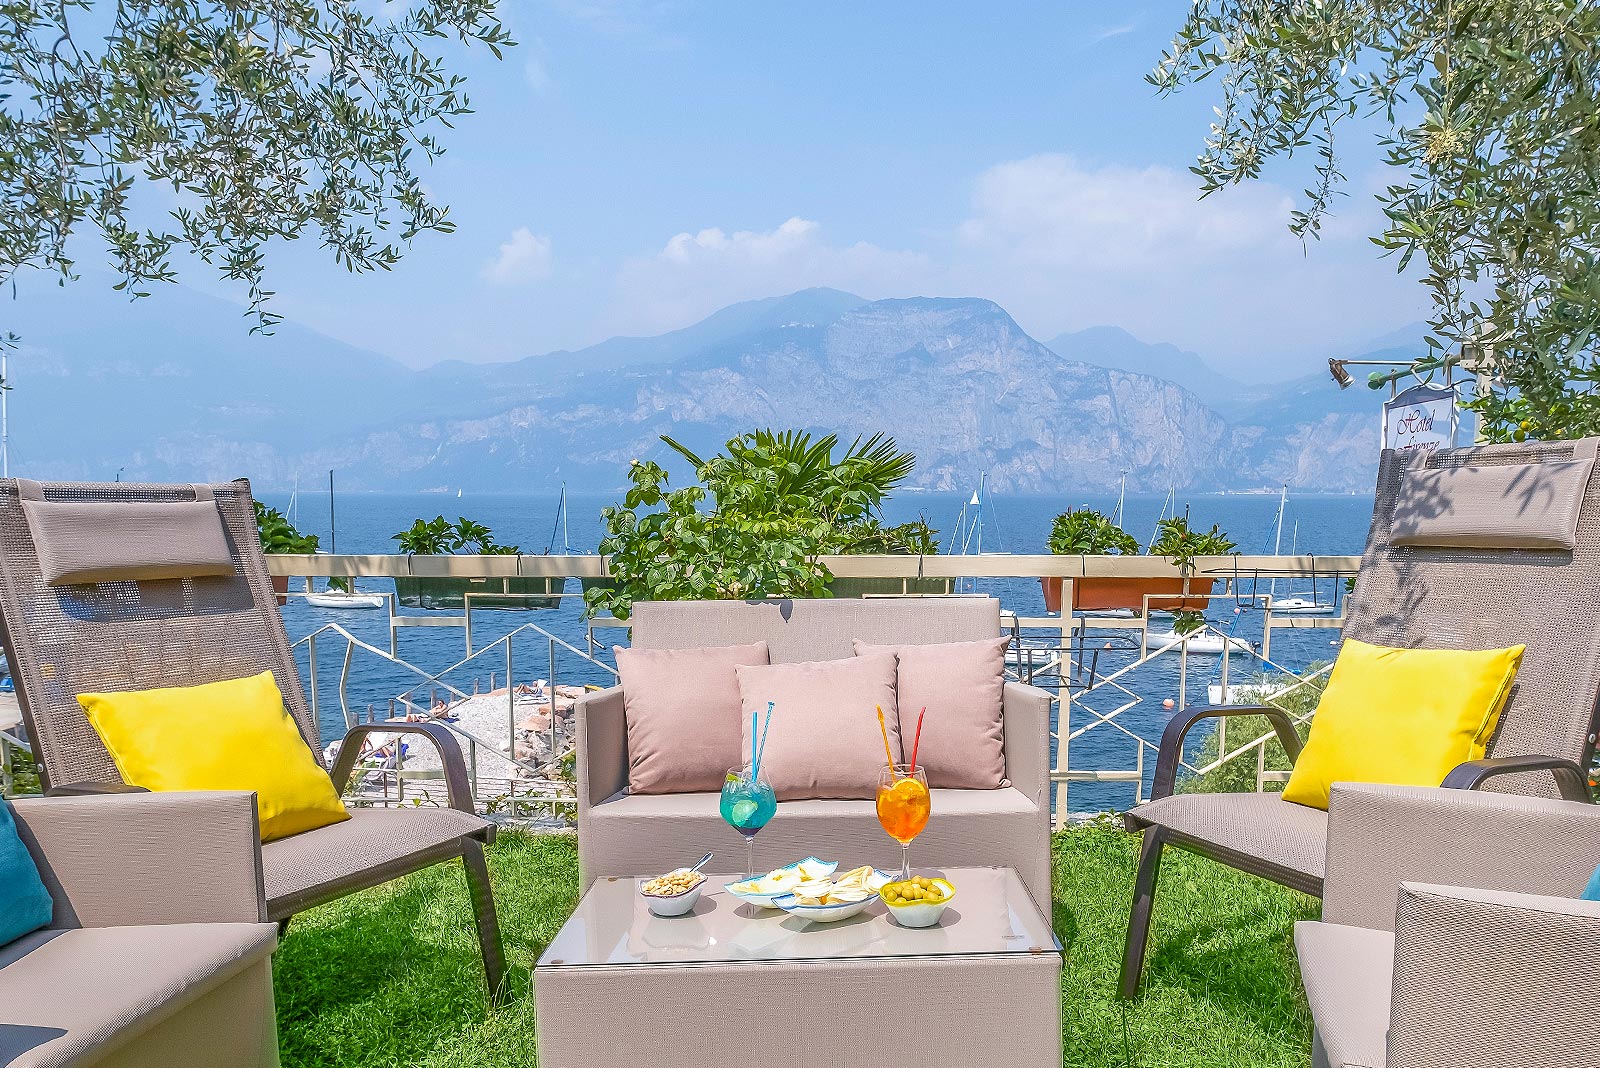 Garden with deck chairs and tables of the 3 star hotel in Lake Garda